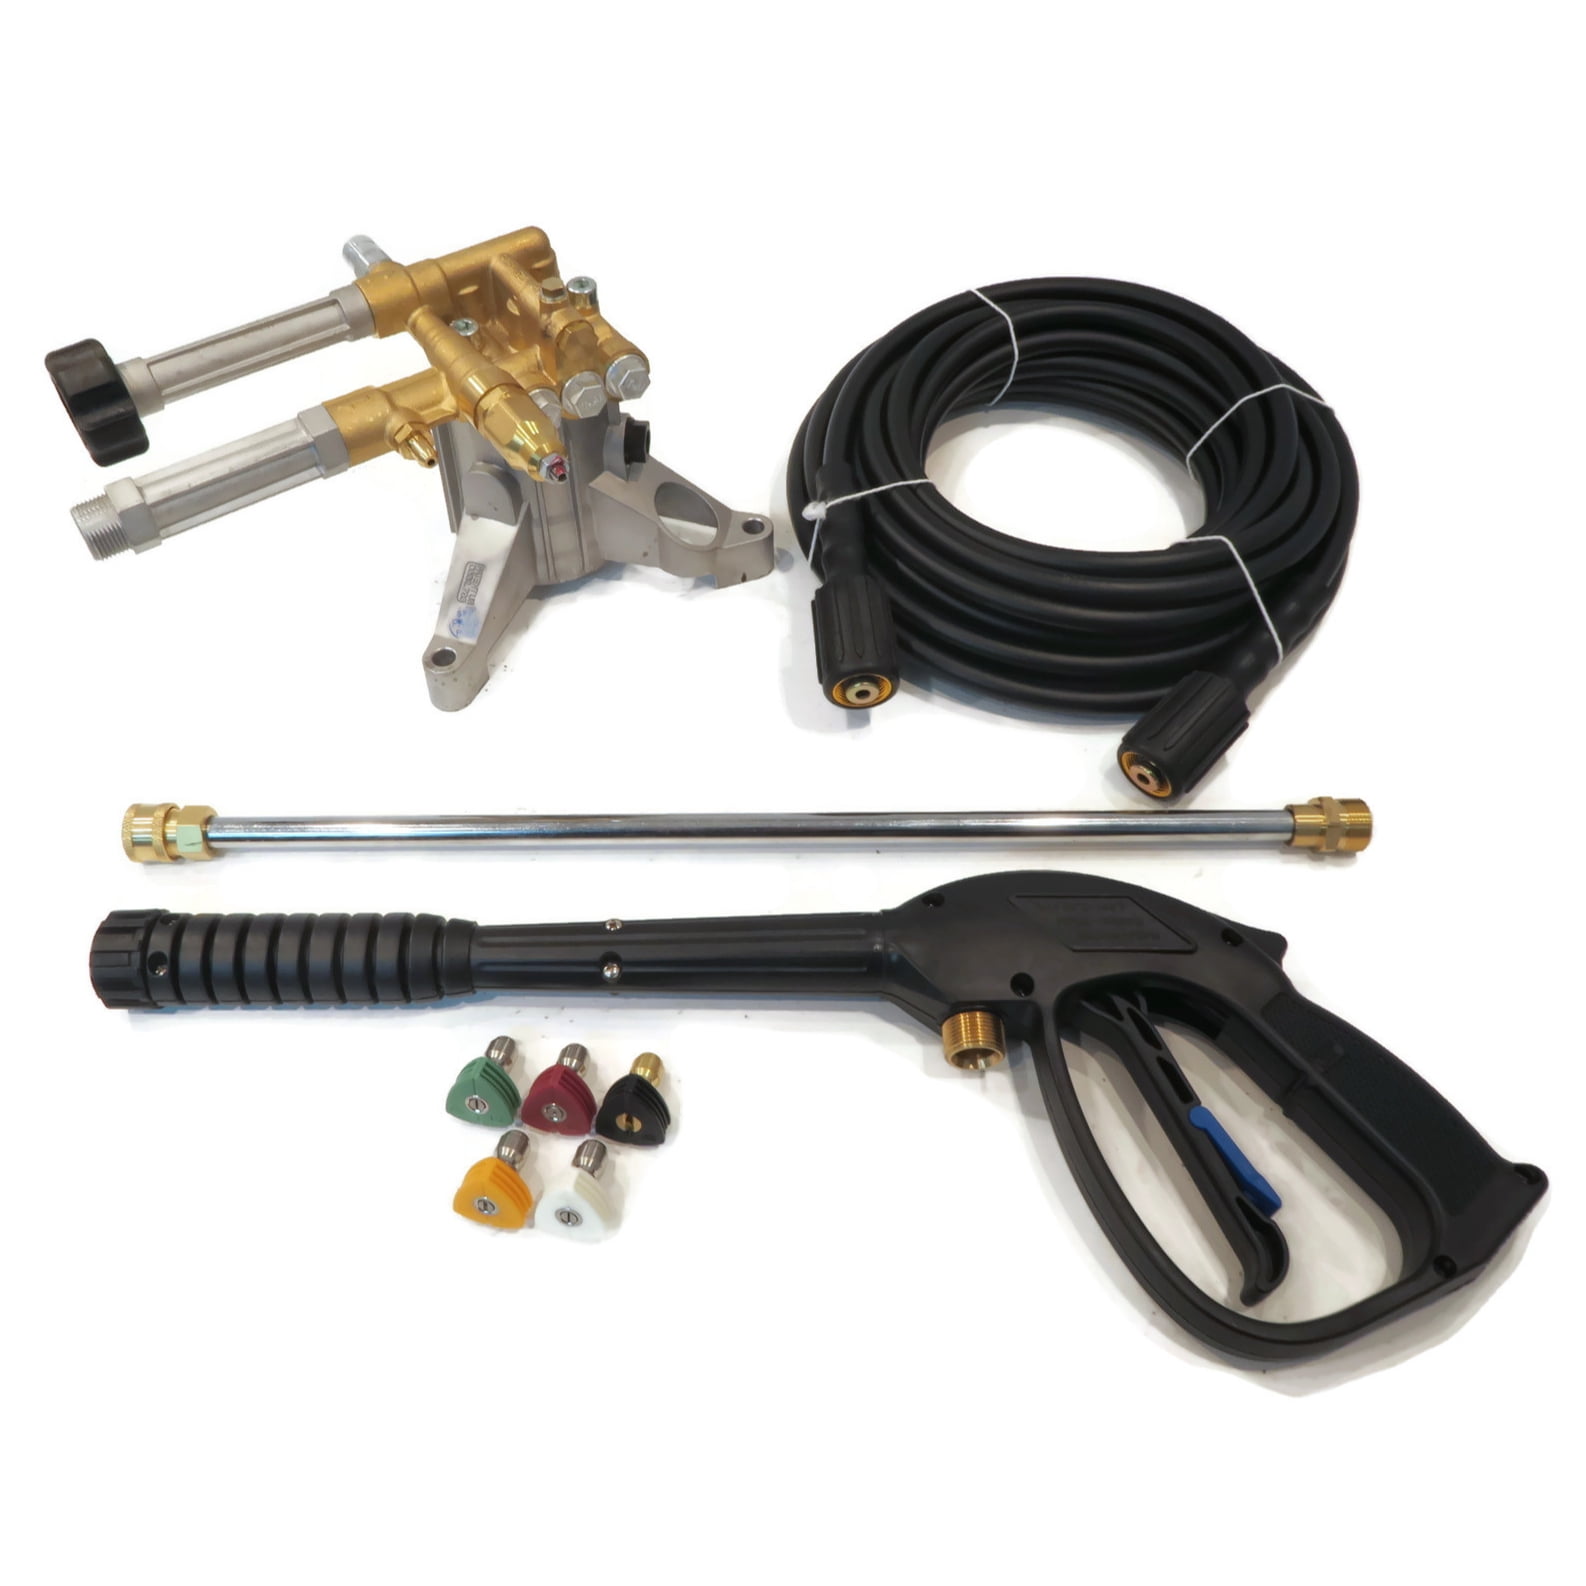 POWER PRESSURE WASHER WATER PUMP & SPRAY KIT Campbell Hausfeld  PW185015LE 